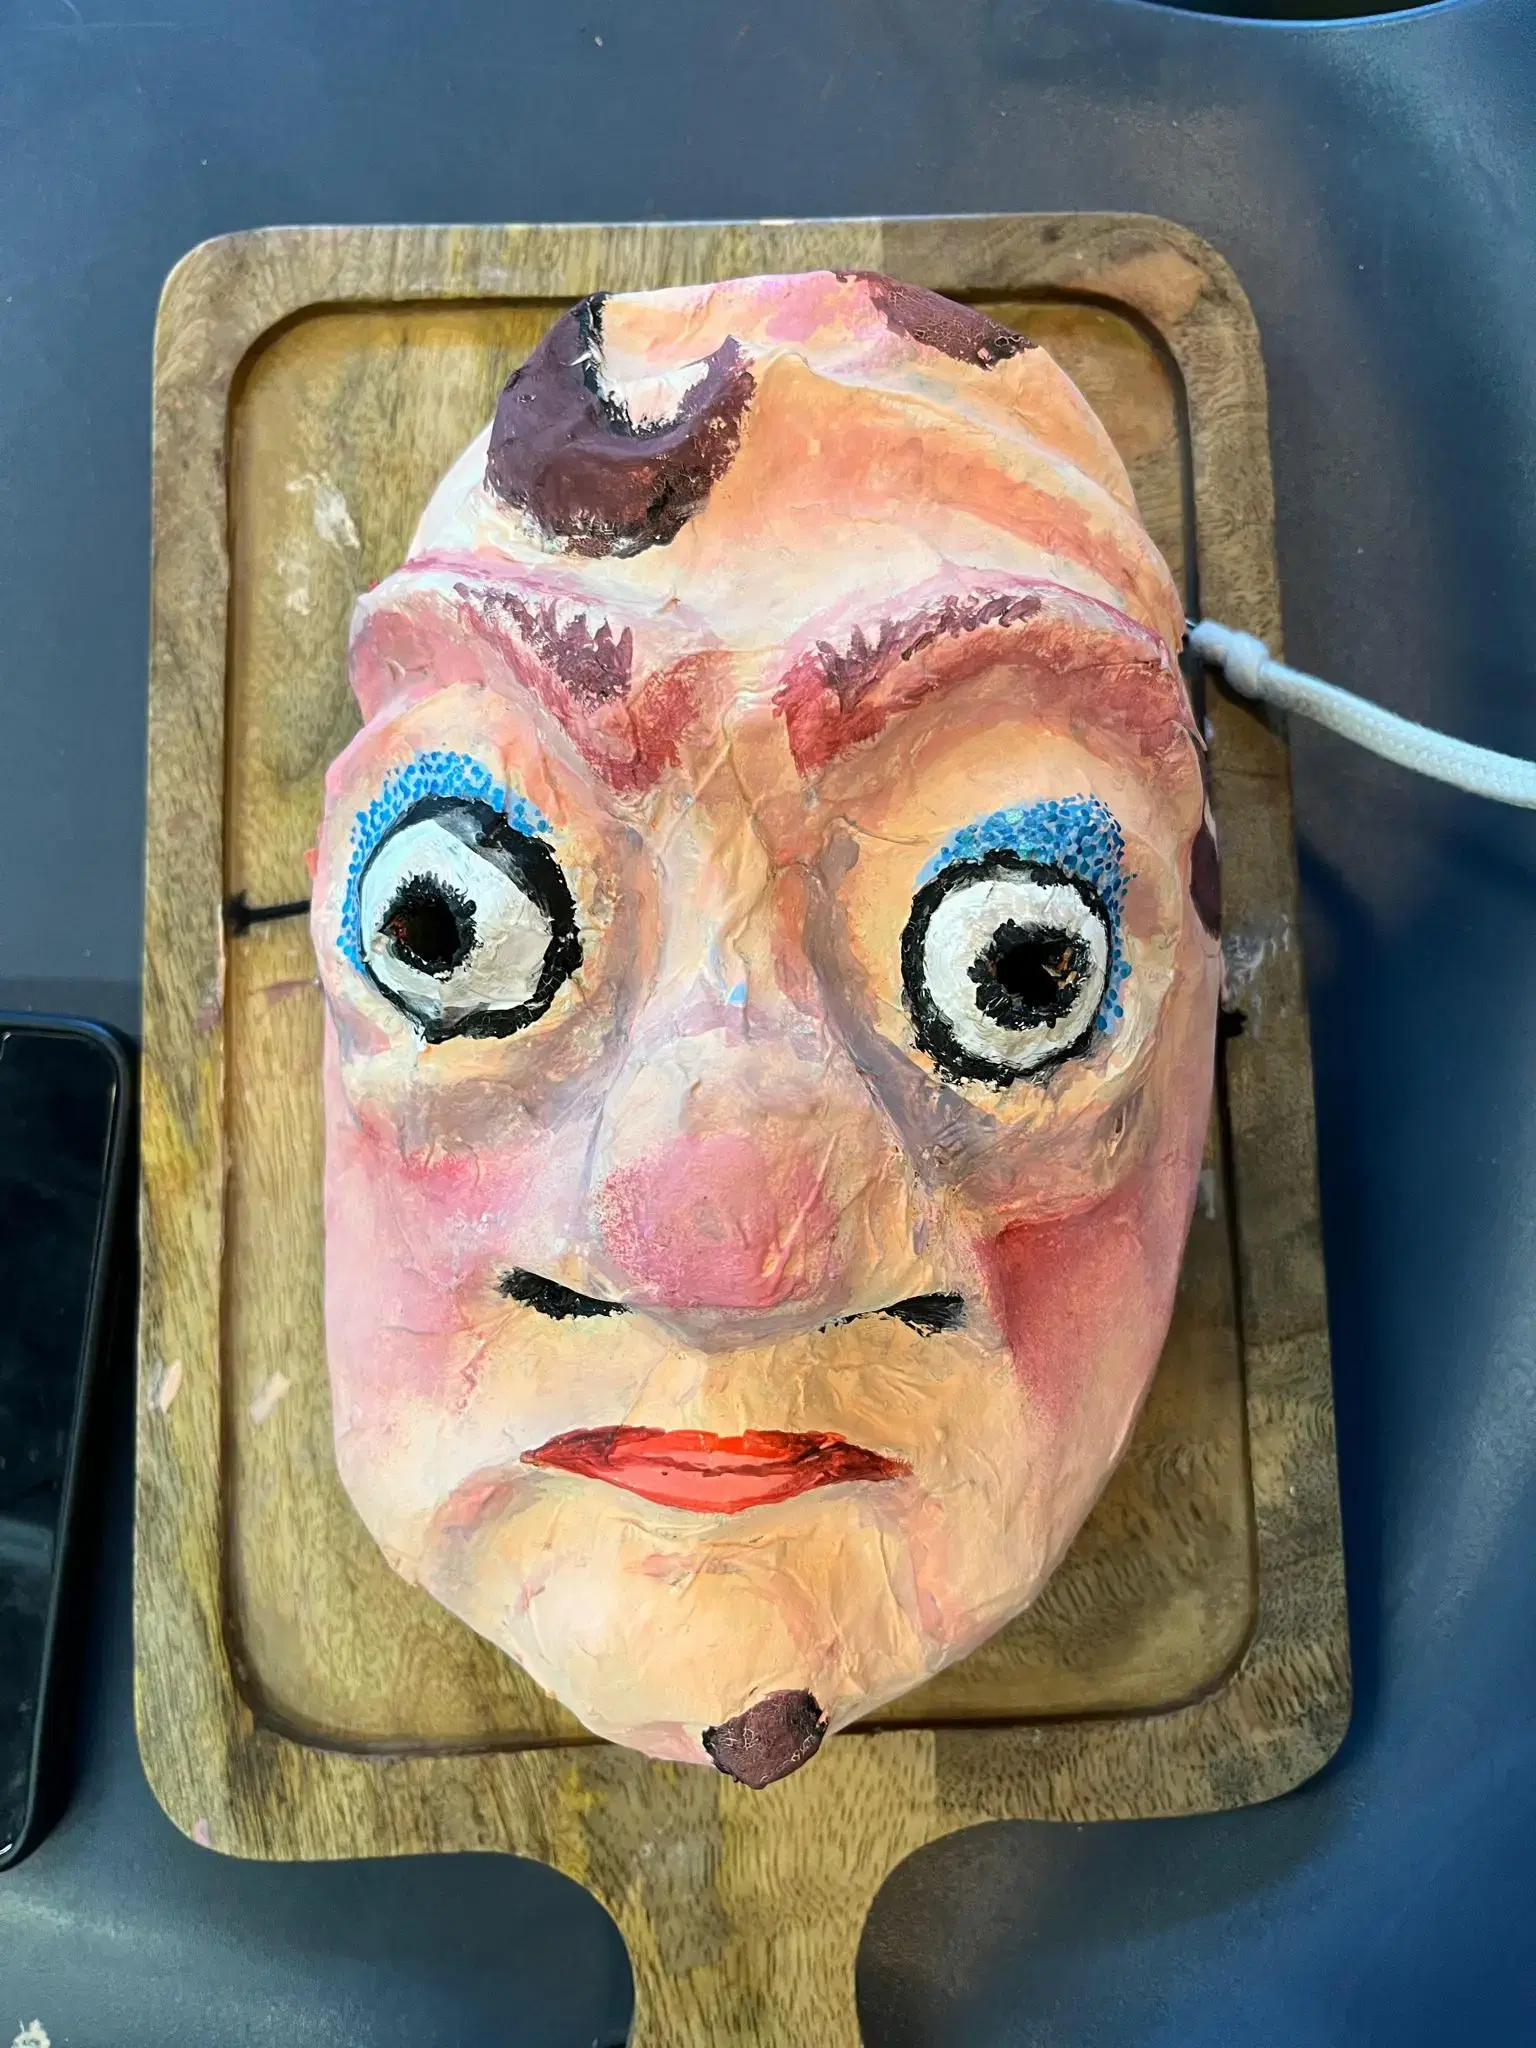 Mask with large eyes and nose on a chopping board